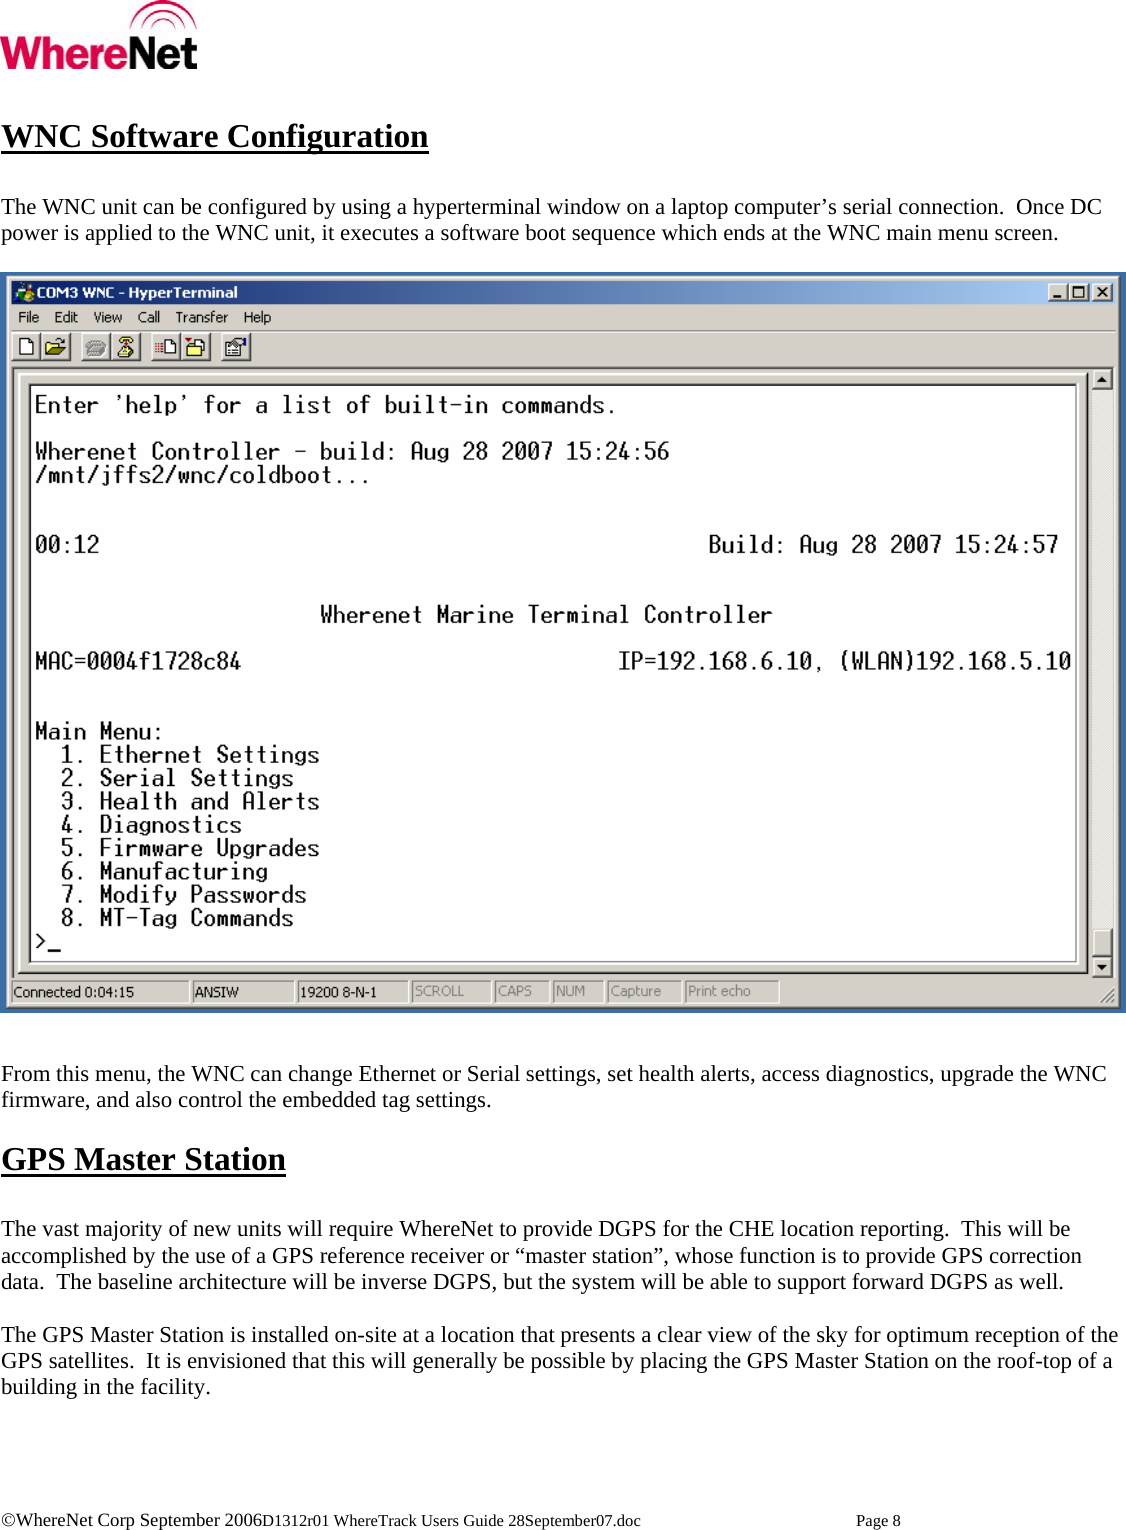    ©WhereNet Corp September 2006D1312r01 WhereTrack Users Guide 28September07.doc  Page 8  WNC Software Configuration  The WNC unit can be configured by using a hyperterminal window on a laptop computer’s serial connection.  Once DC power is applied to the WNC unit, it executes a software boot sequence which ends at the WNC main menu screen.     From this menu, the WNC can change Ethernet or Serial settings, set health alerts, access diagnostics, upgrade the WNC firmware, and also control the embedded tag settings.  GPS Master Station  The vast majority of new units will require WhereNet to provide DGPS for the CHE location reporting.  This will be accomplished by the use of a GPS reference receiver or “master station”, whose function is to provide GPS correction data.  The baseline architecture will be inverse DGPS, but the system will be able to support forward DGPS as well.  The GPS Master Station is installed on-site at a location that presents a clear view of the sky for optimum reception of the GPS satellites.  It is envisioned that this will generally be possible by placing the GPS Master Station on the roof-top of a building in the facility.  